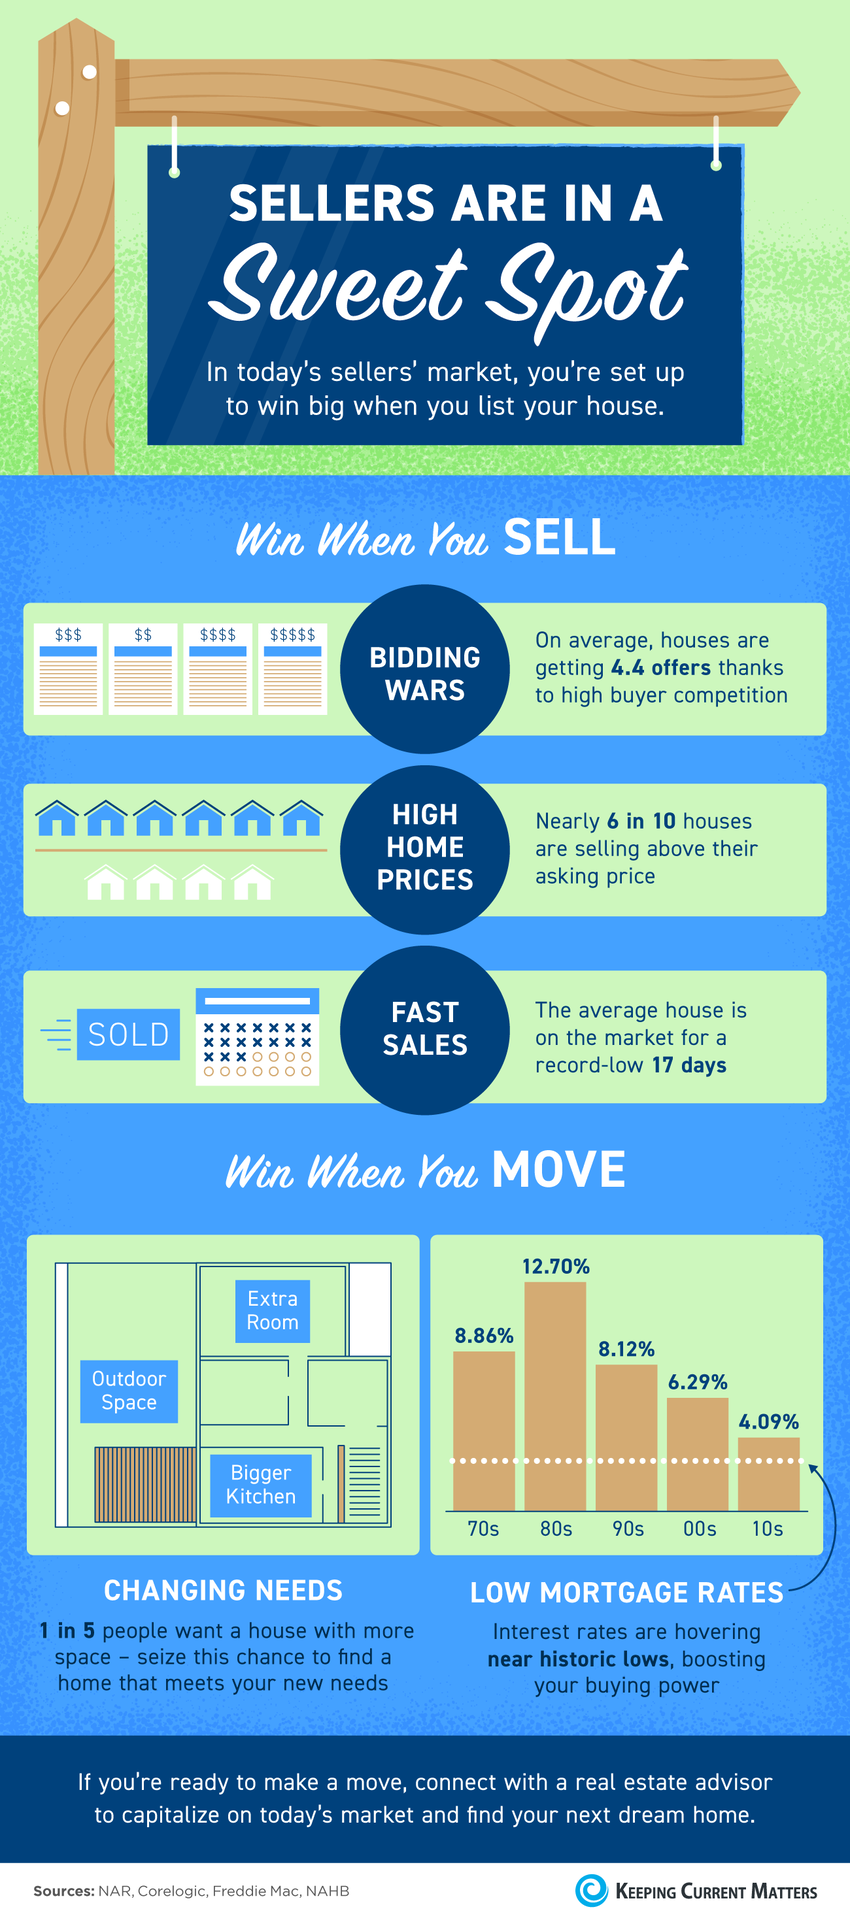 Sellers Are in a Sweet Spot [INFOGRAPHIC] | Keeping Current Matters